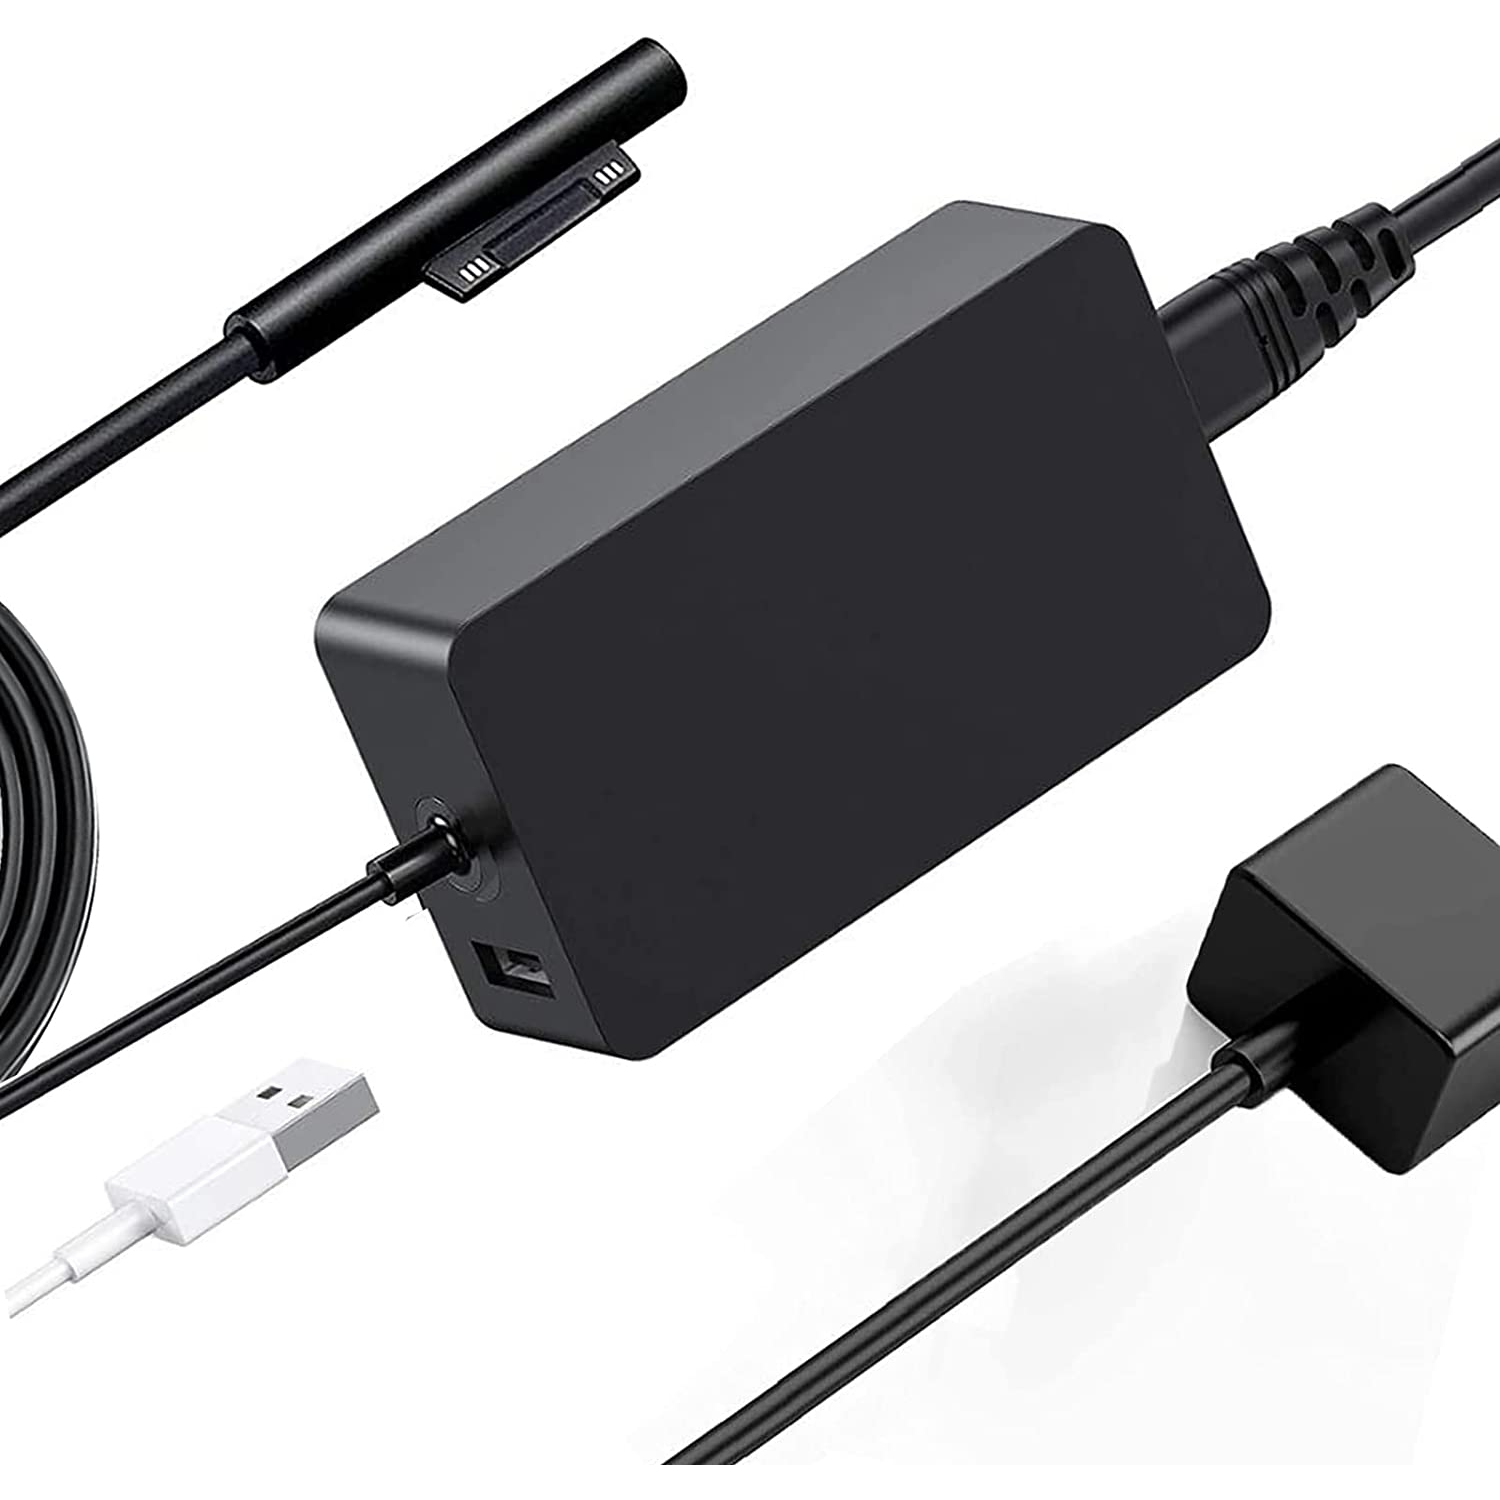 DOLAER 65W Power Adapter Charger for Microsoft Surface Pro 3/4/5/6/7/7+/8, Surface Go, Surface Book Laptop/Tablet